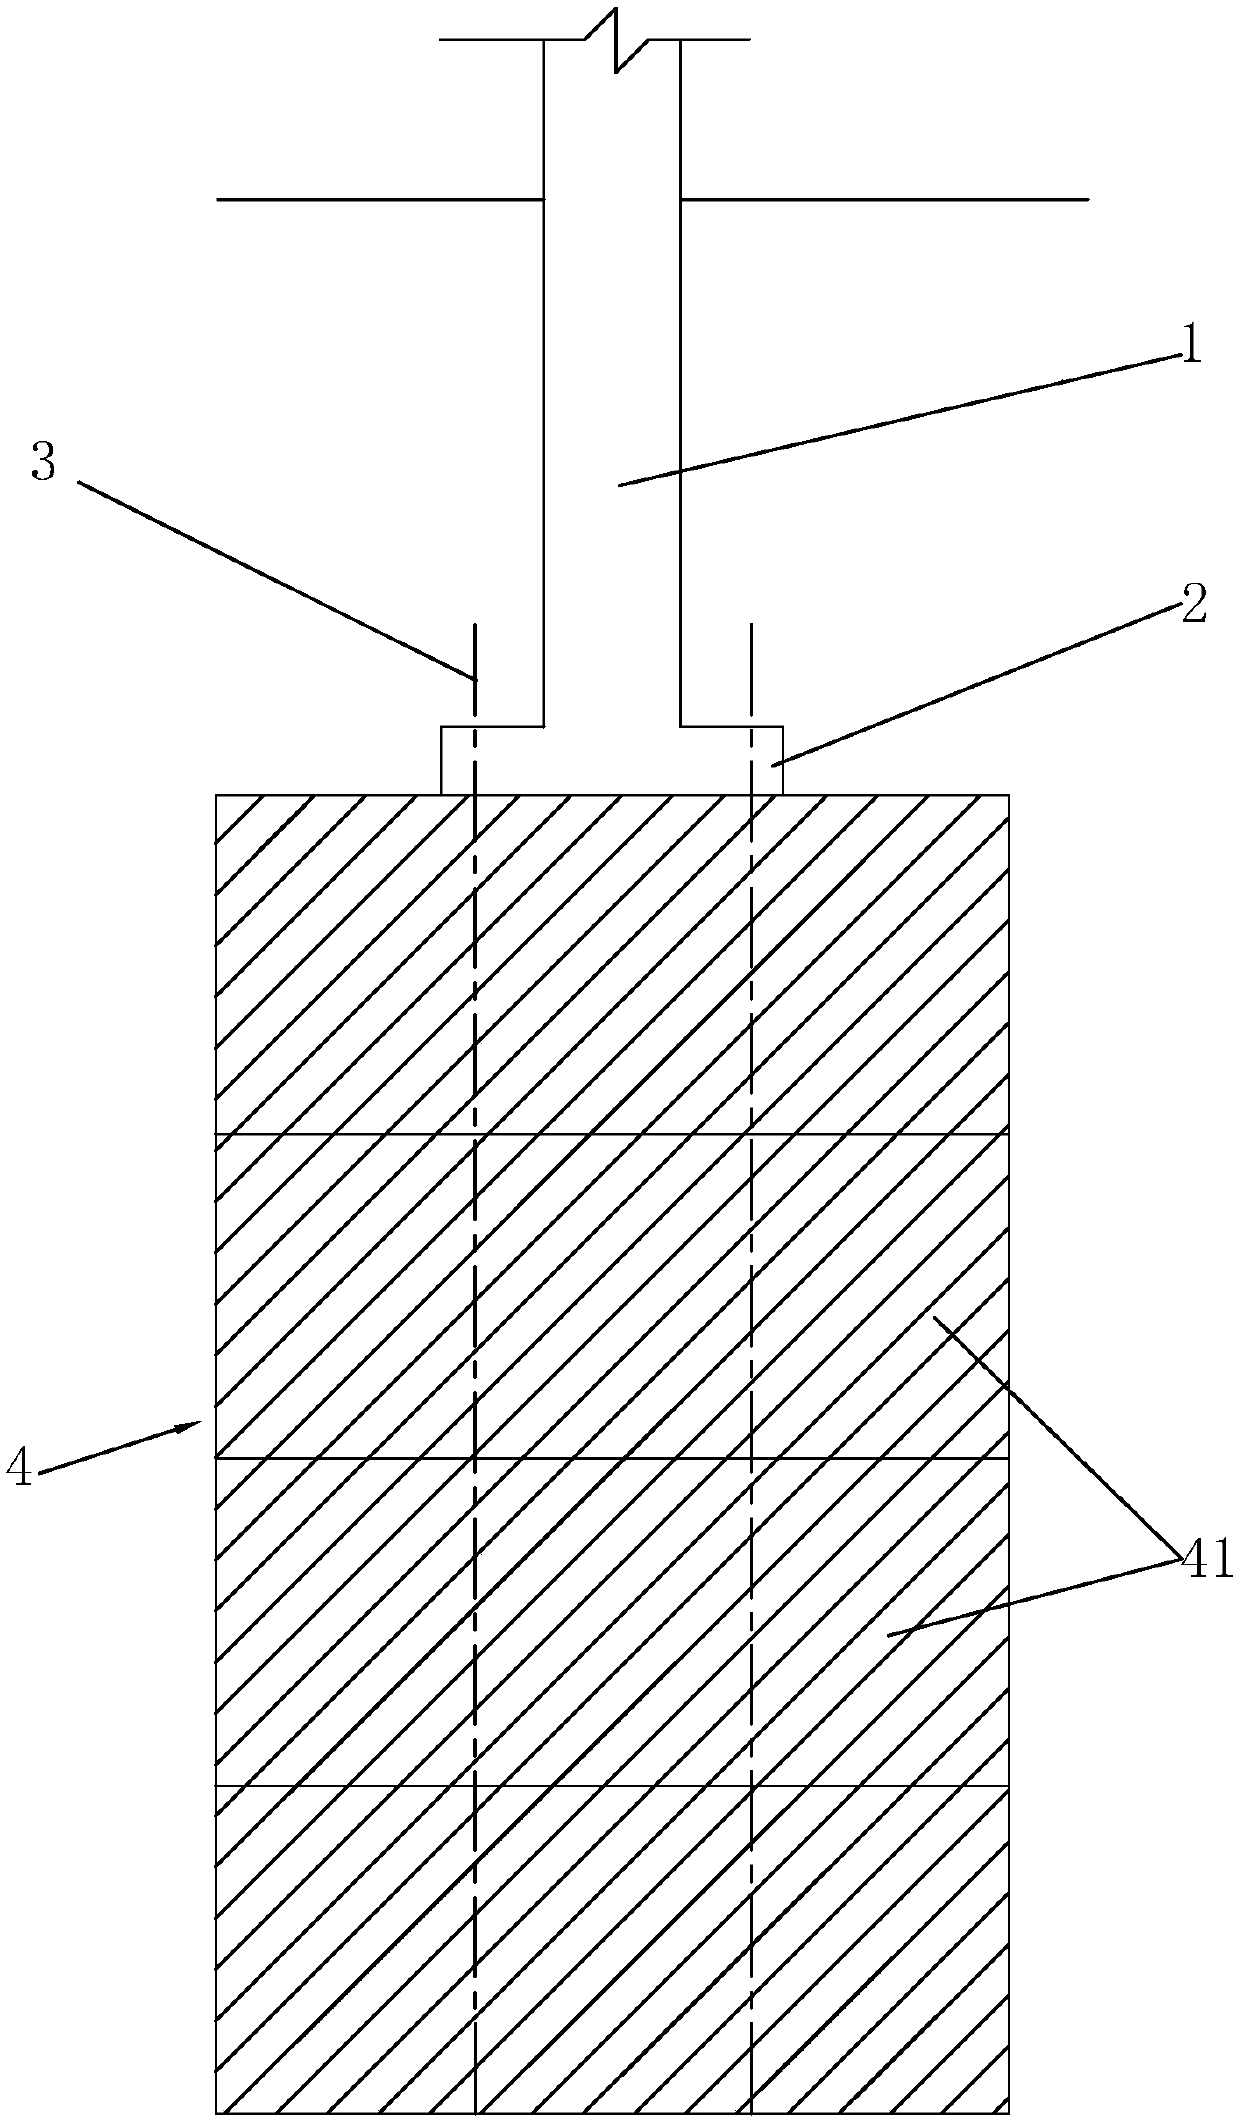 Settling, reinforcing and lifting method of independent foundations of existing building